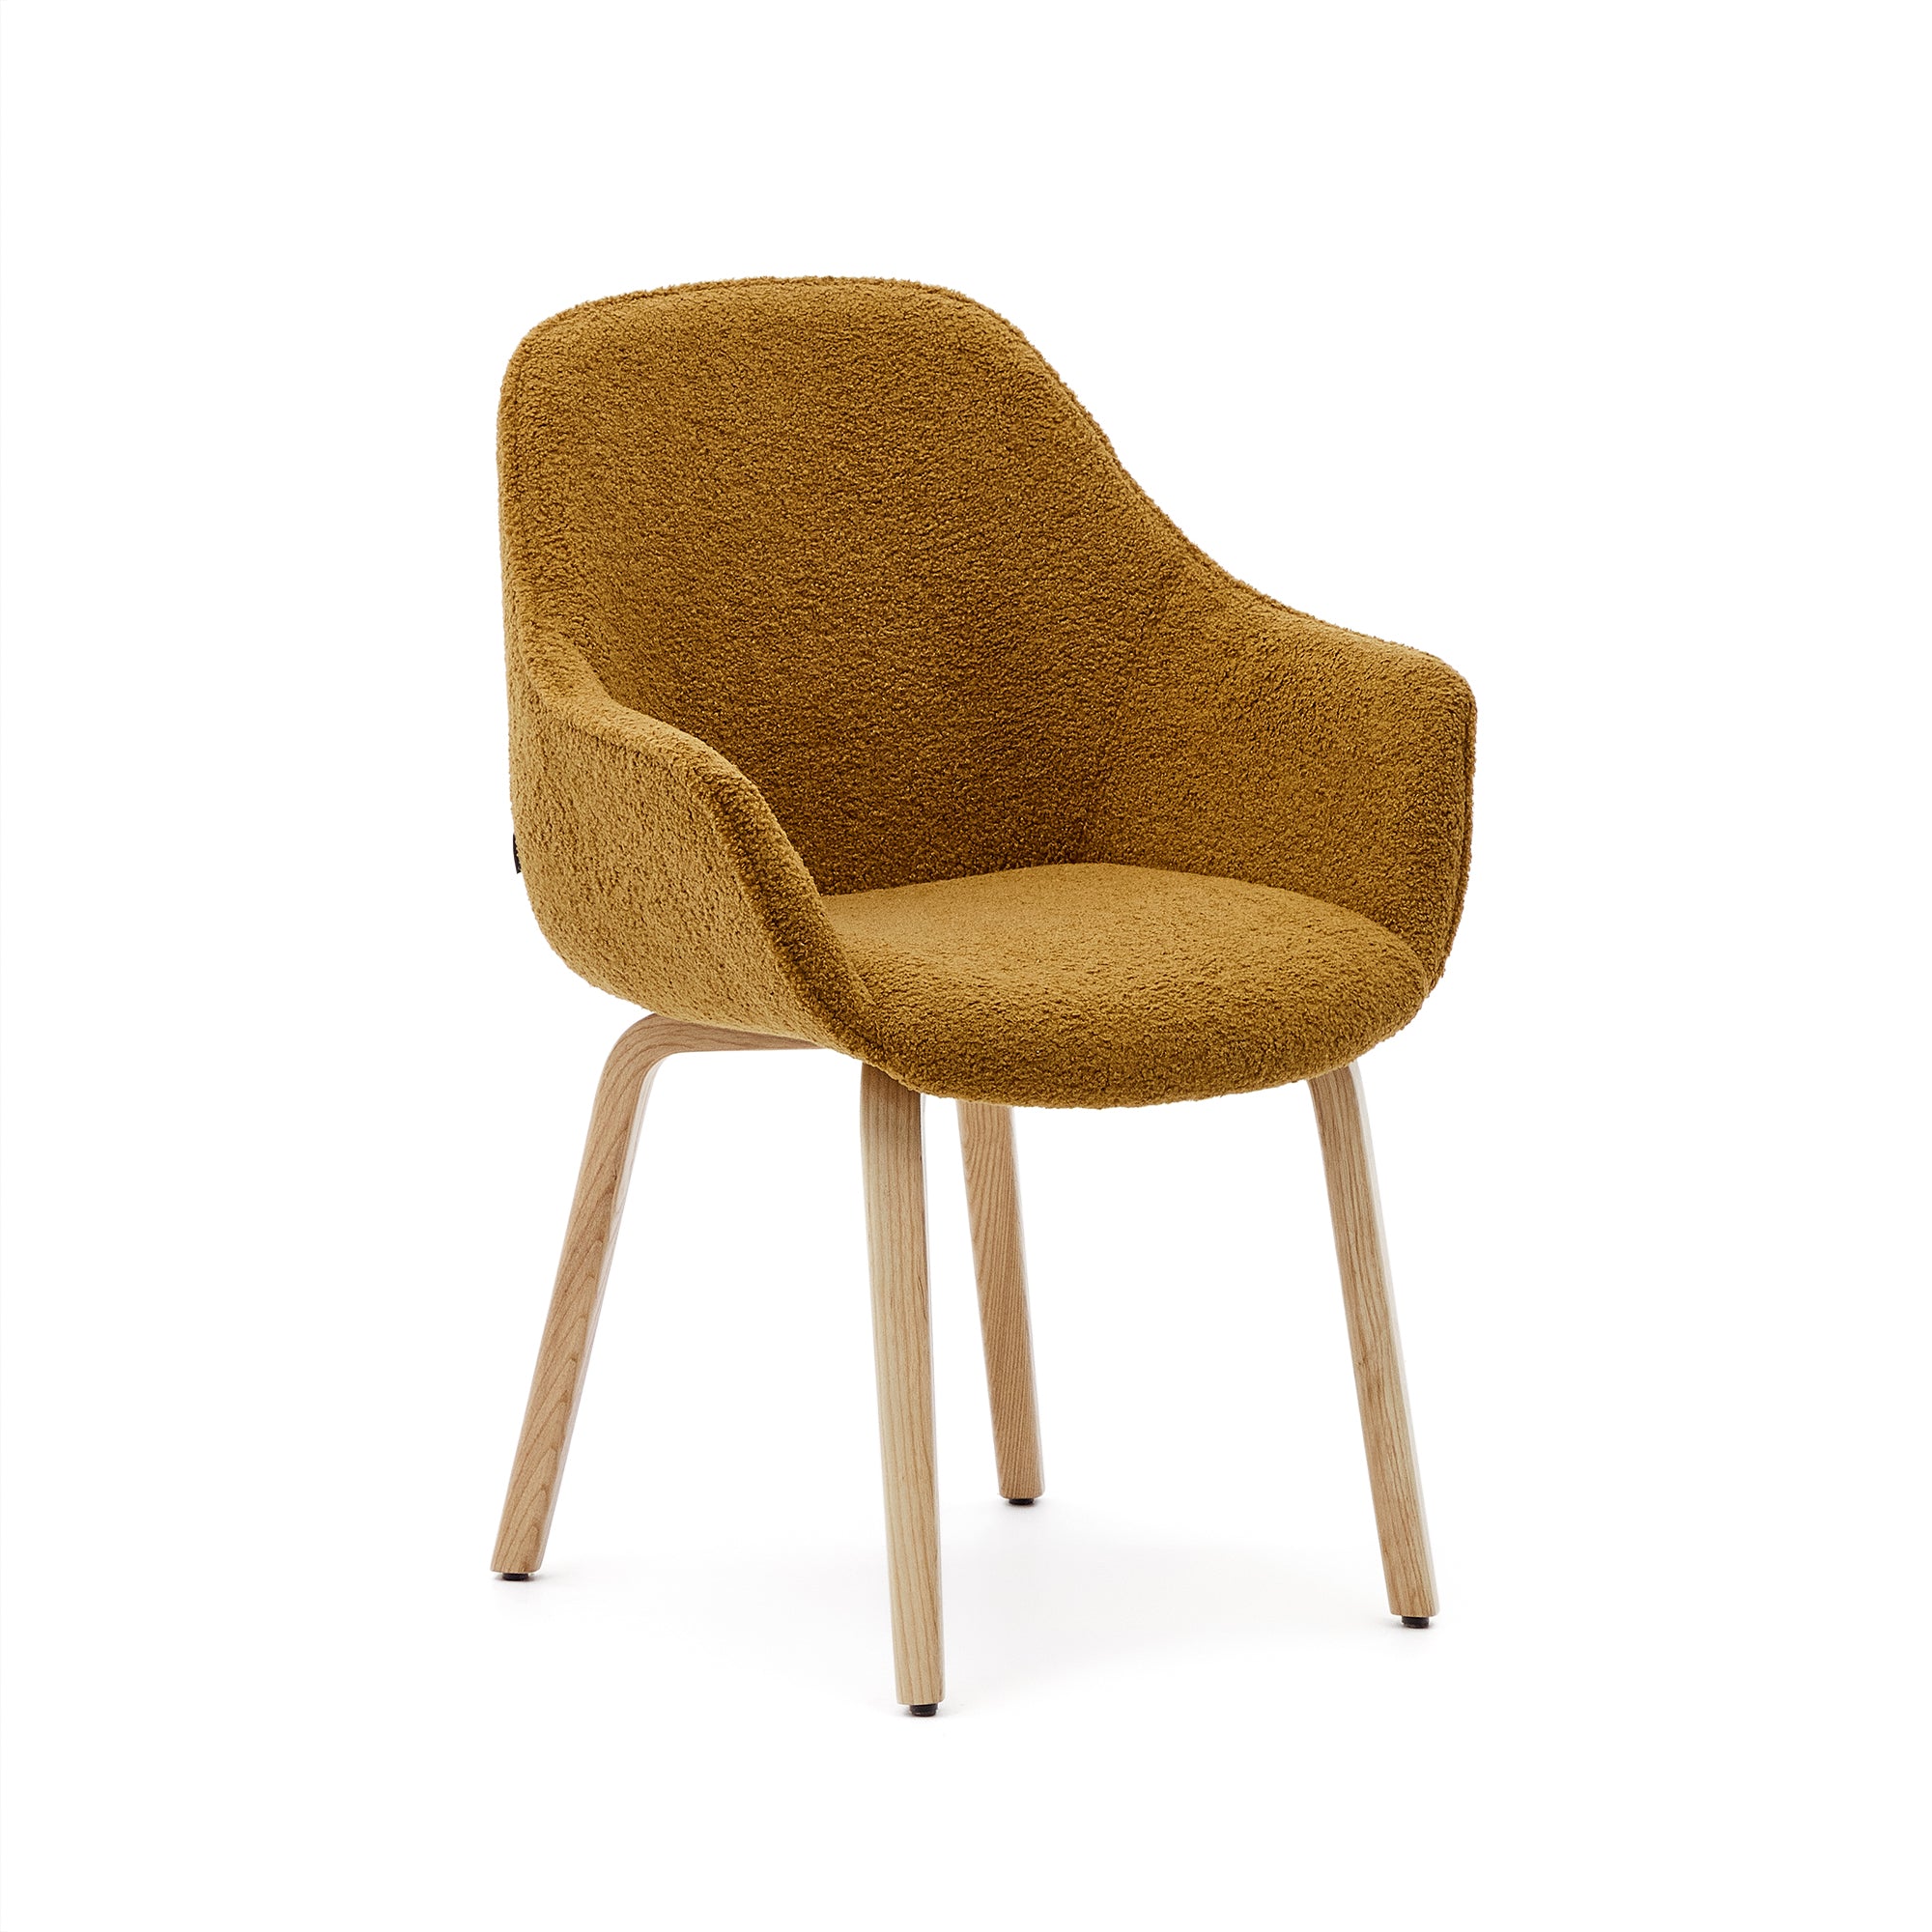 Aleli chair in mustard shearling with solid ash wood legs and natural finish